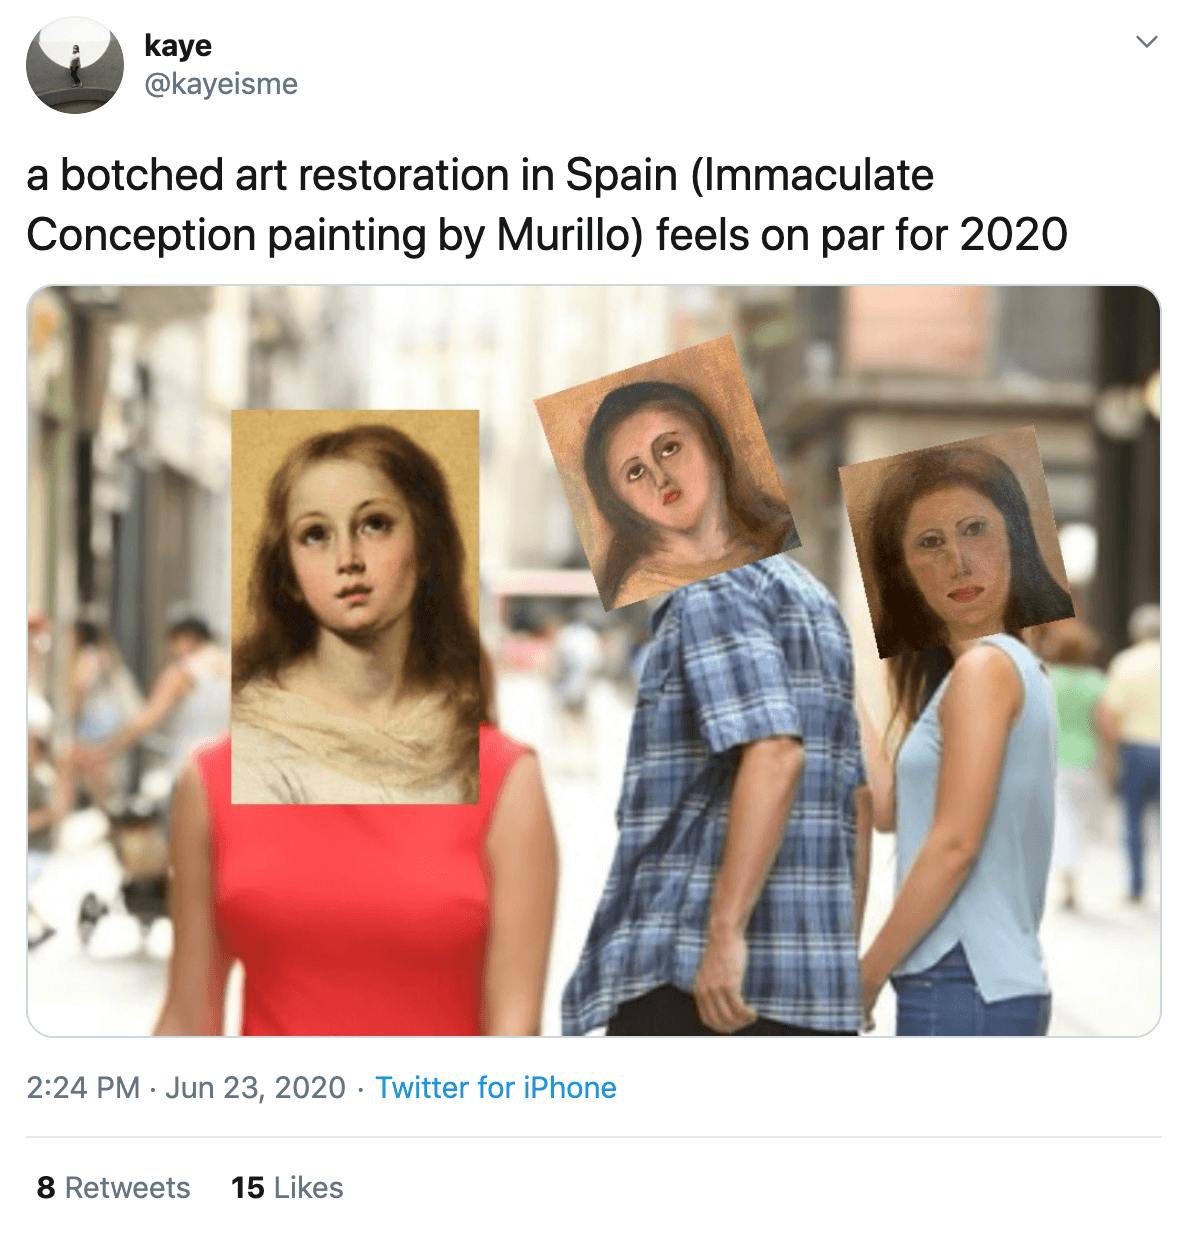 "a botched art restoration in Spain (Immaculate Conception painting by Murillo) feels on par for 2020" men of man hjolding girlfriend's hand while looking at another woman with the three versions of Mary's face on theirs